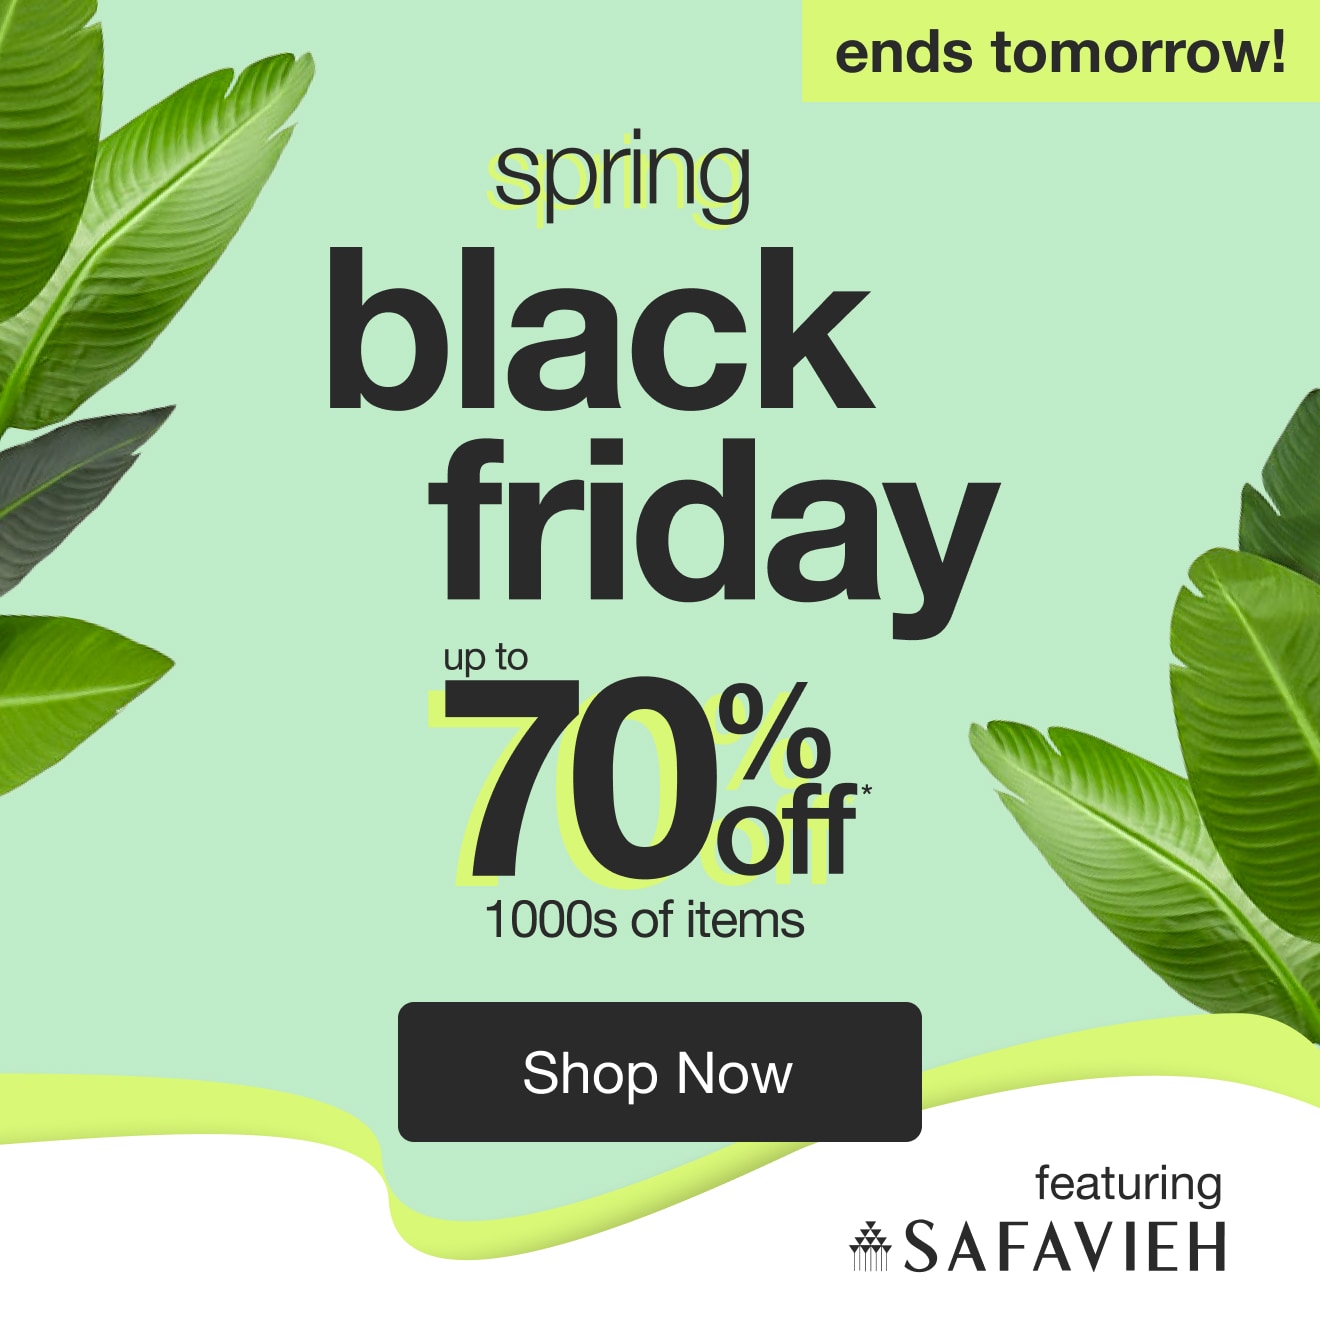 Spring Black Friday Up to 70% Off 1000s of Items